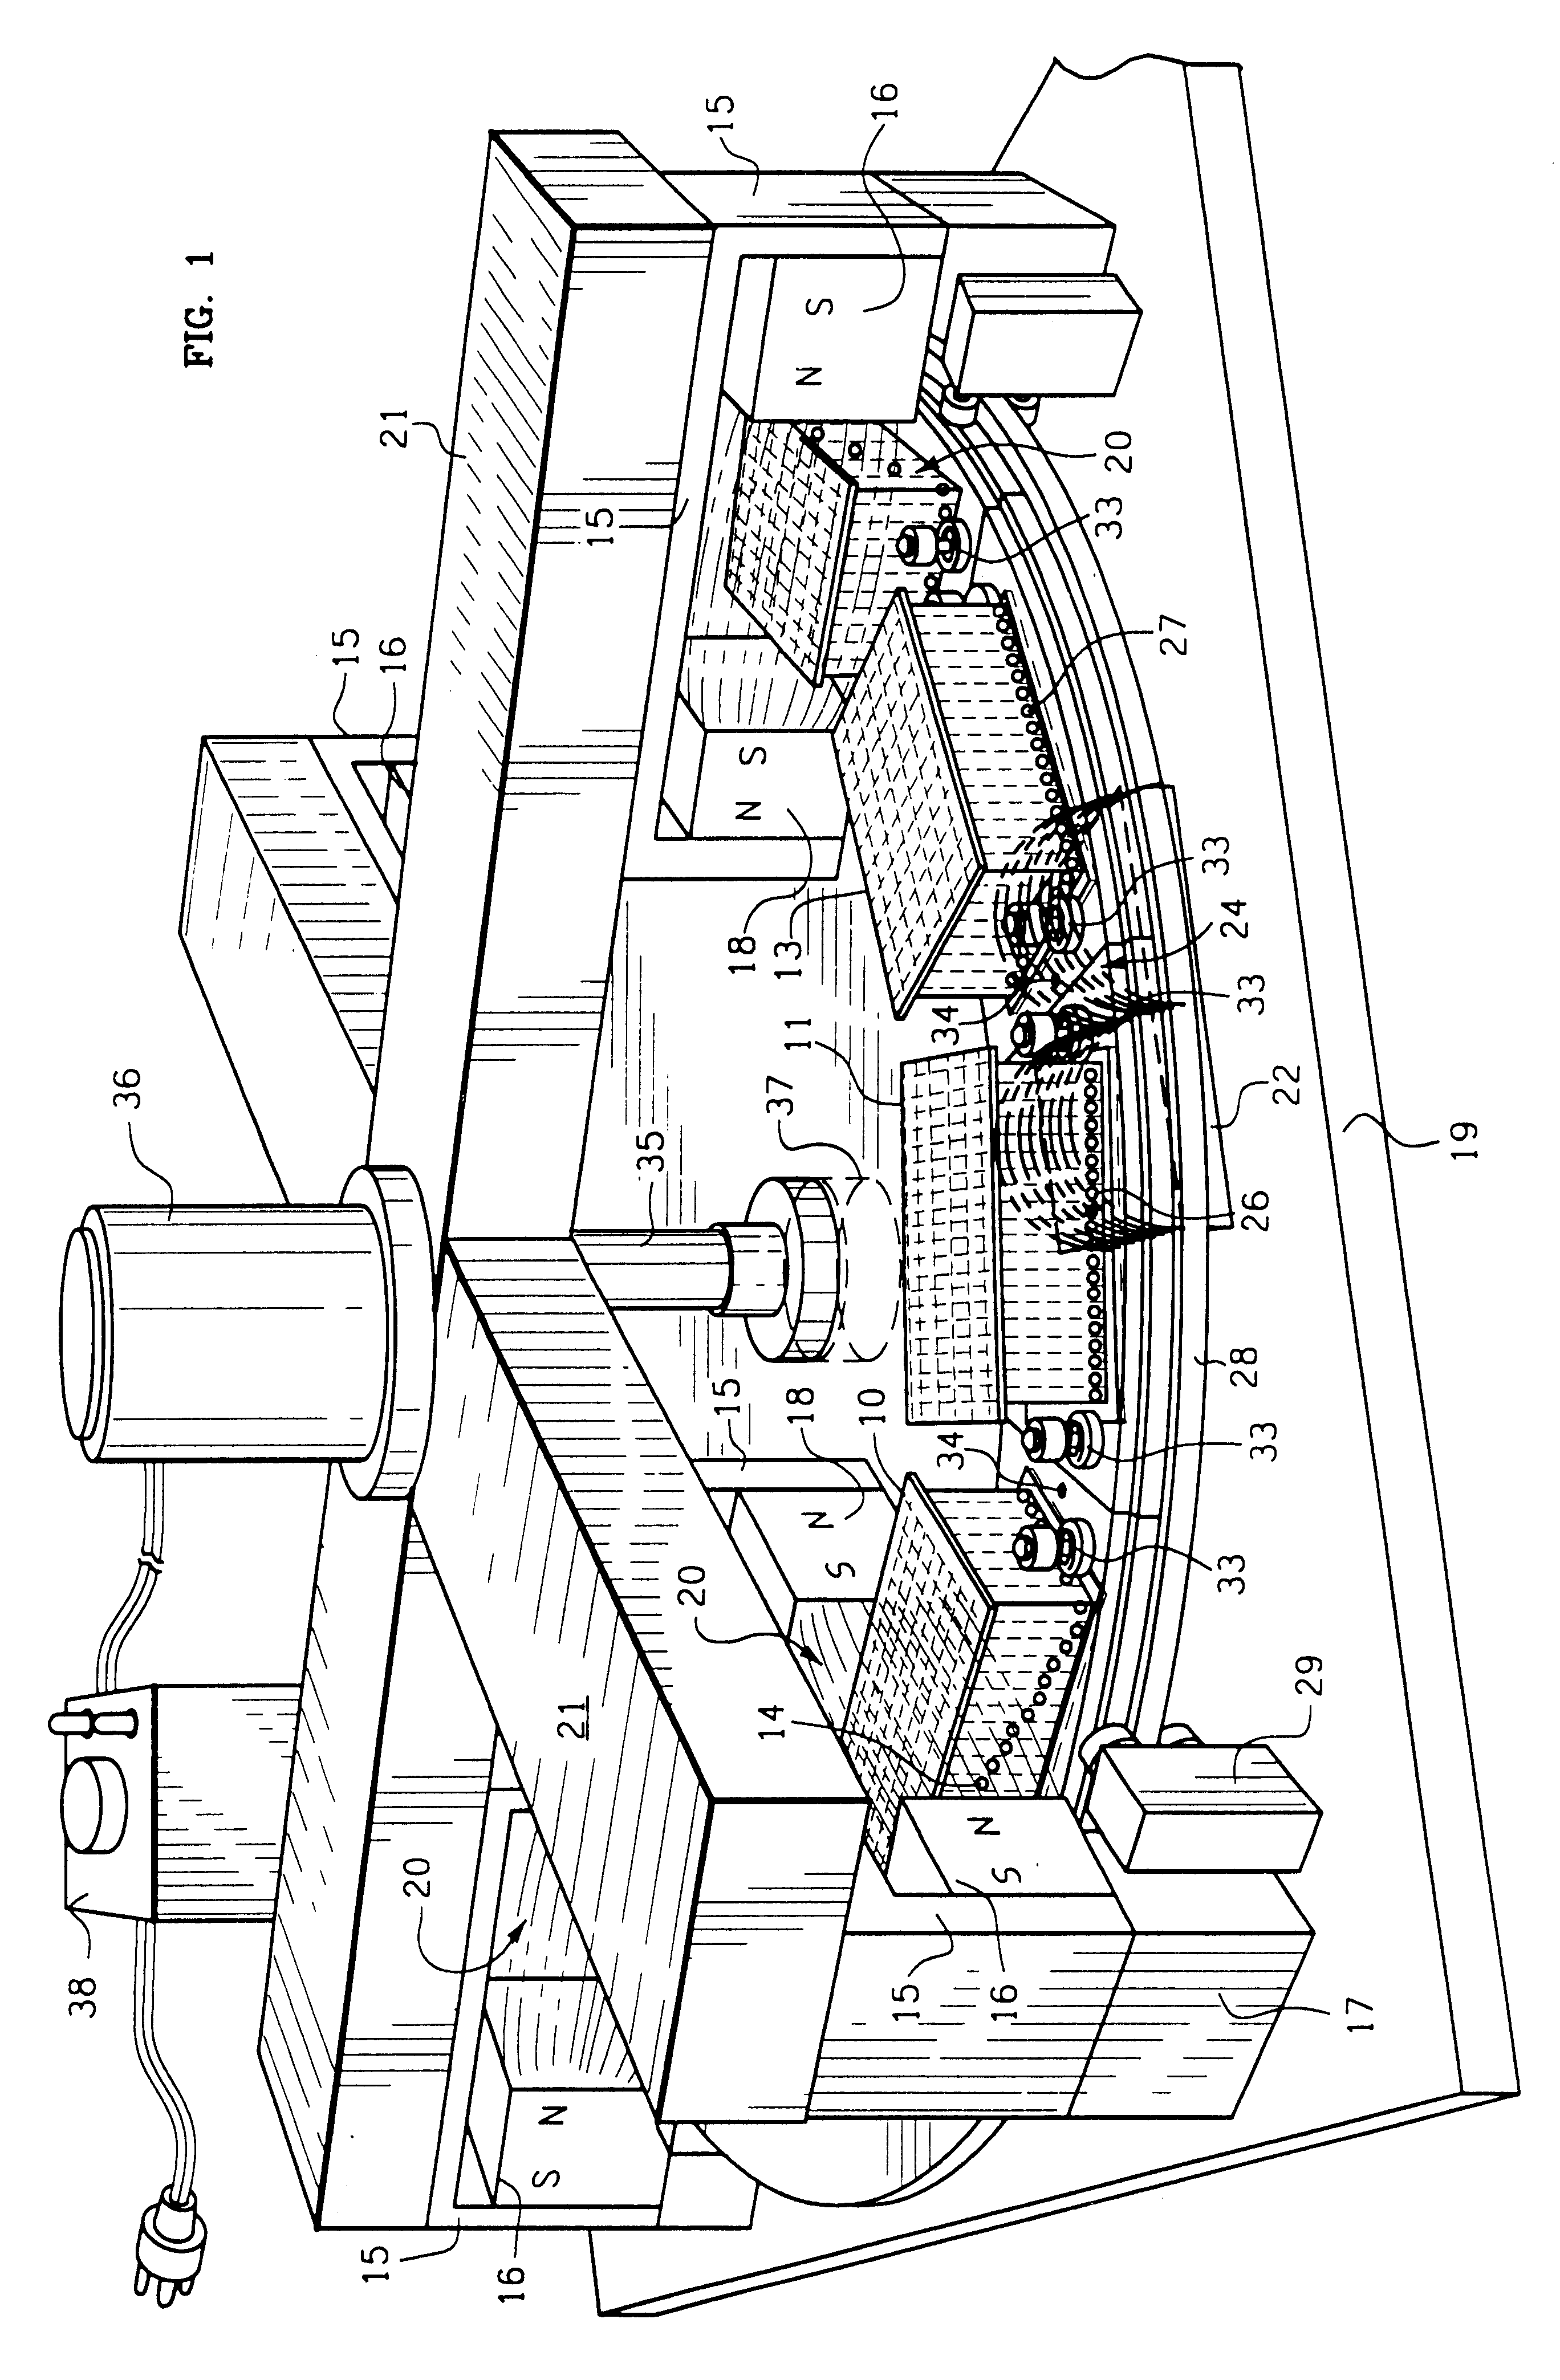 Magnetic levitation stirring devices and machines for mixing in vessels